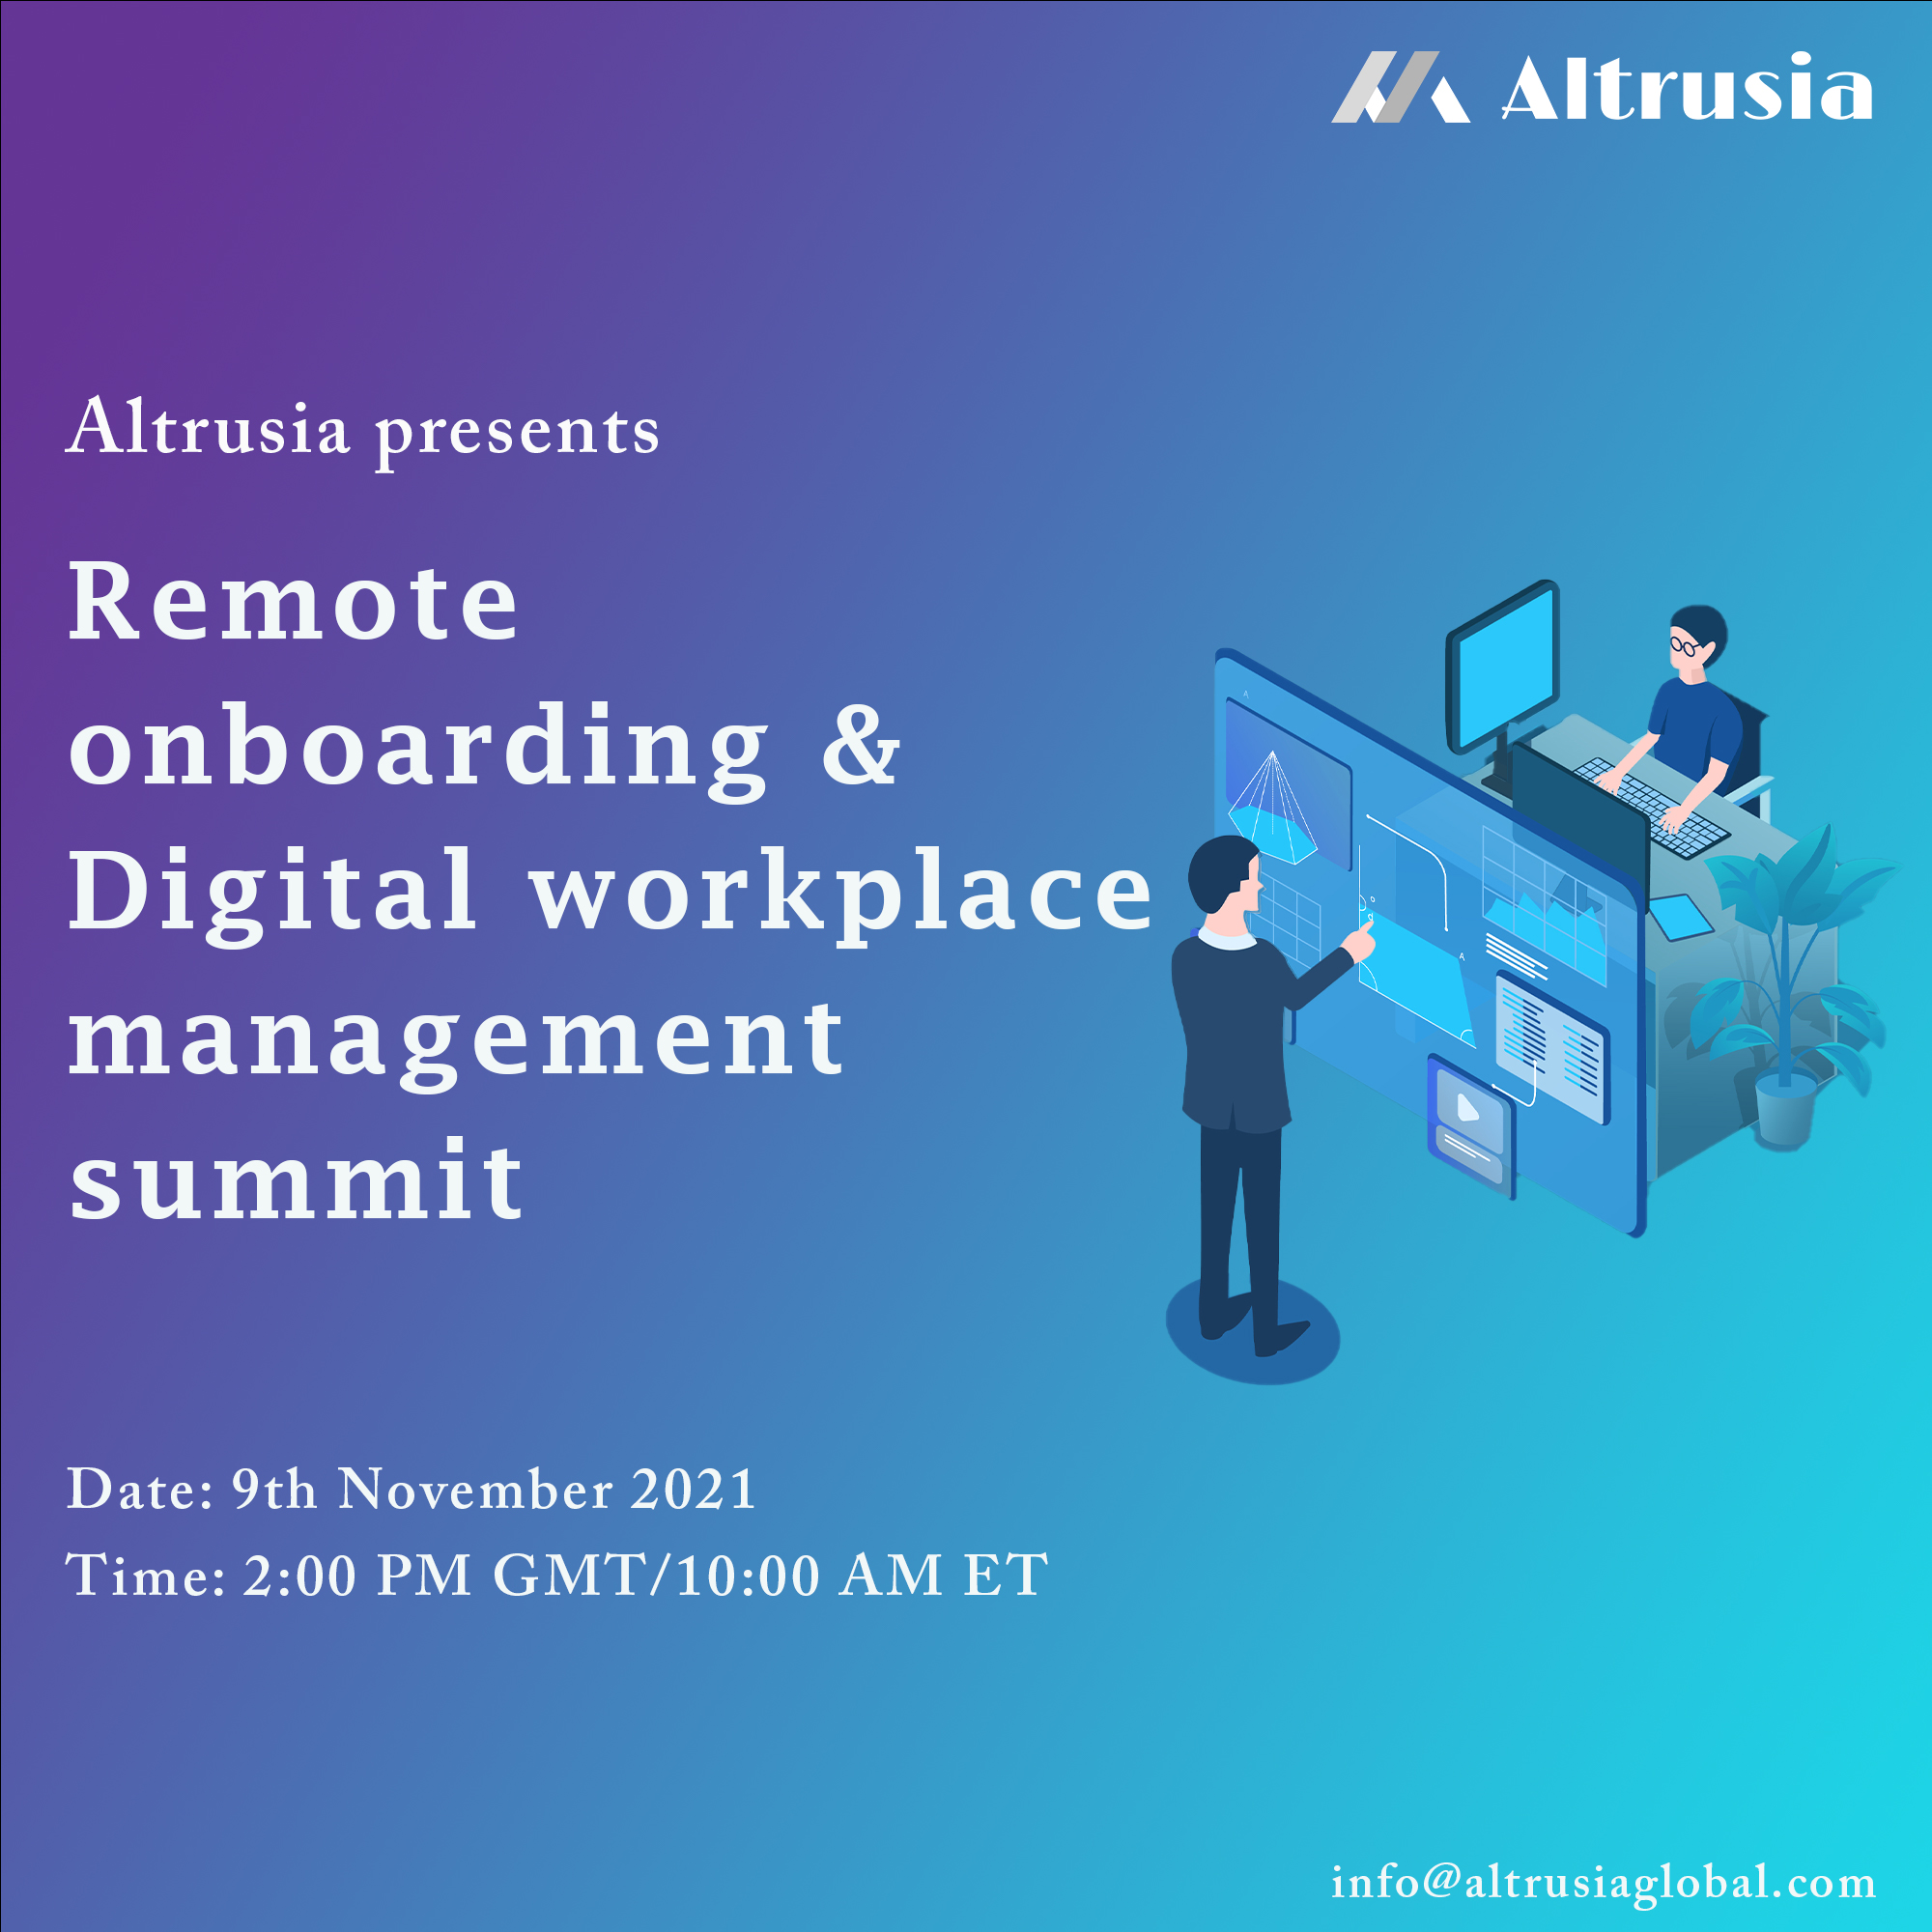 Remote Onboarding & Digital Workplace Management Summit organized by Altrusia